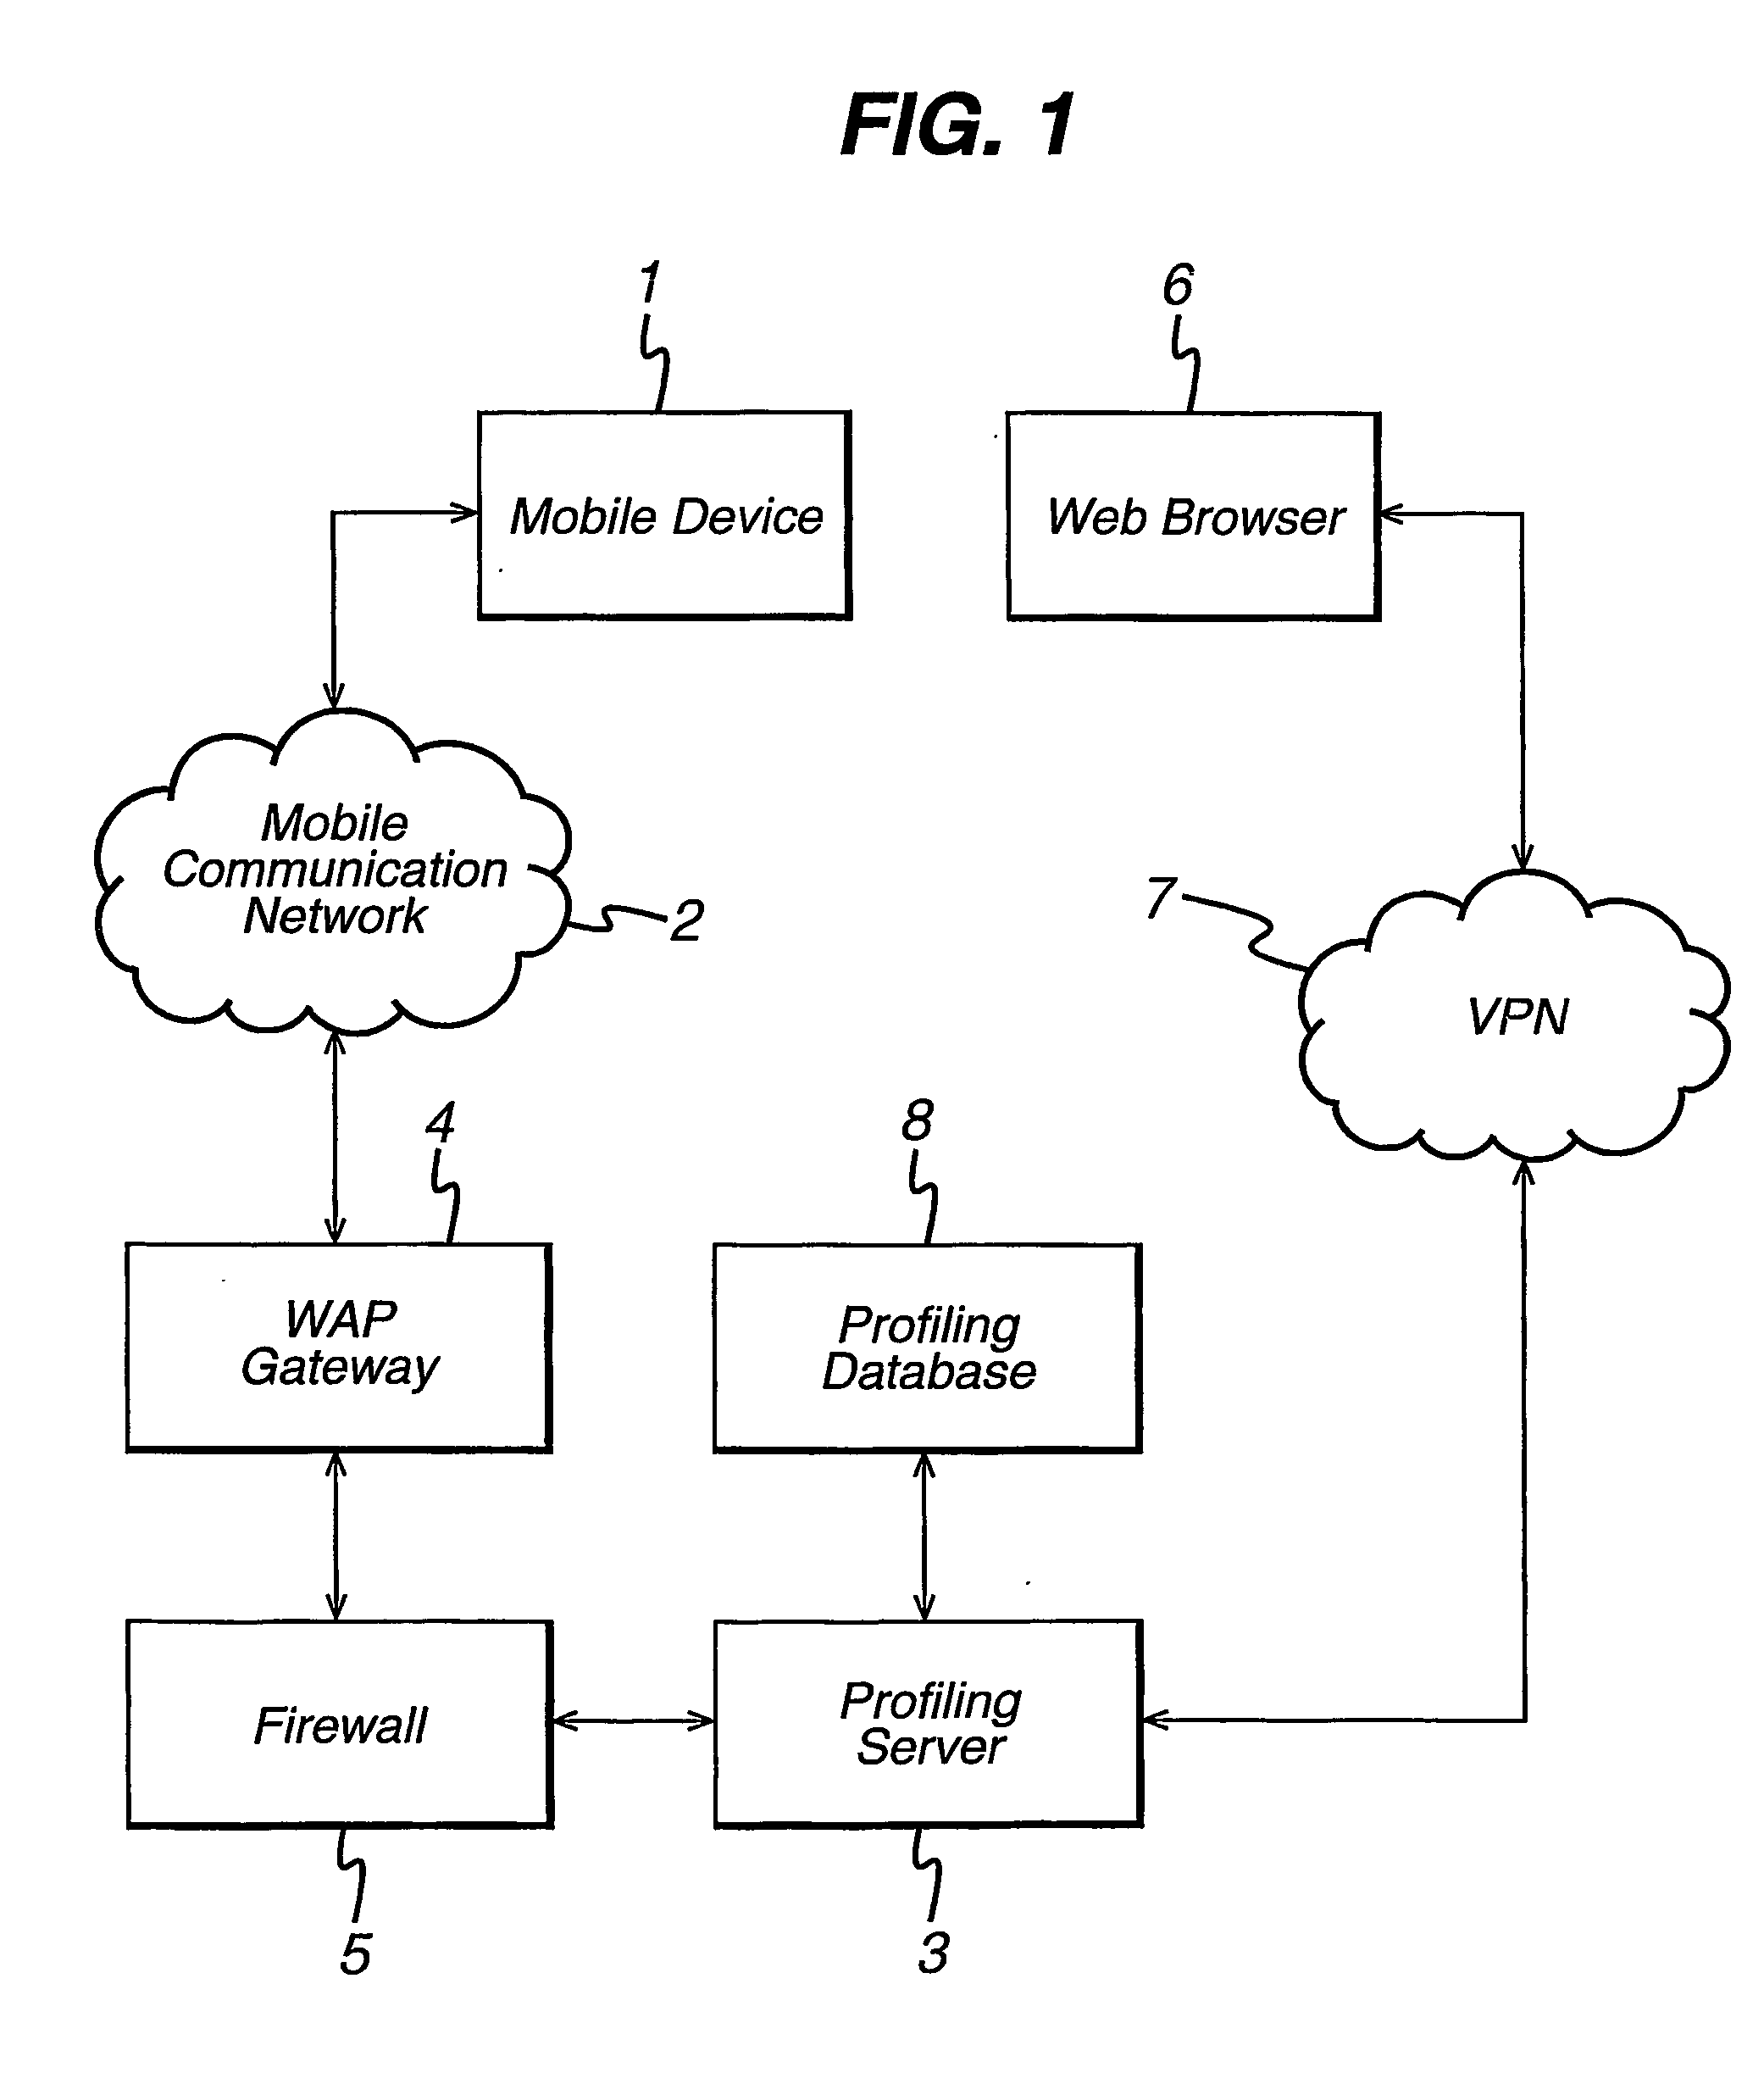 Method and apparatus for profiling characteristic of mobile devices